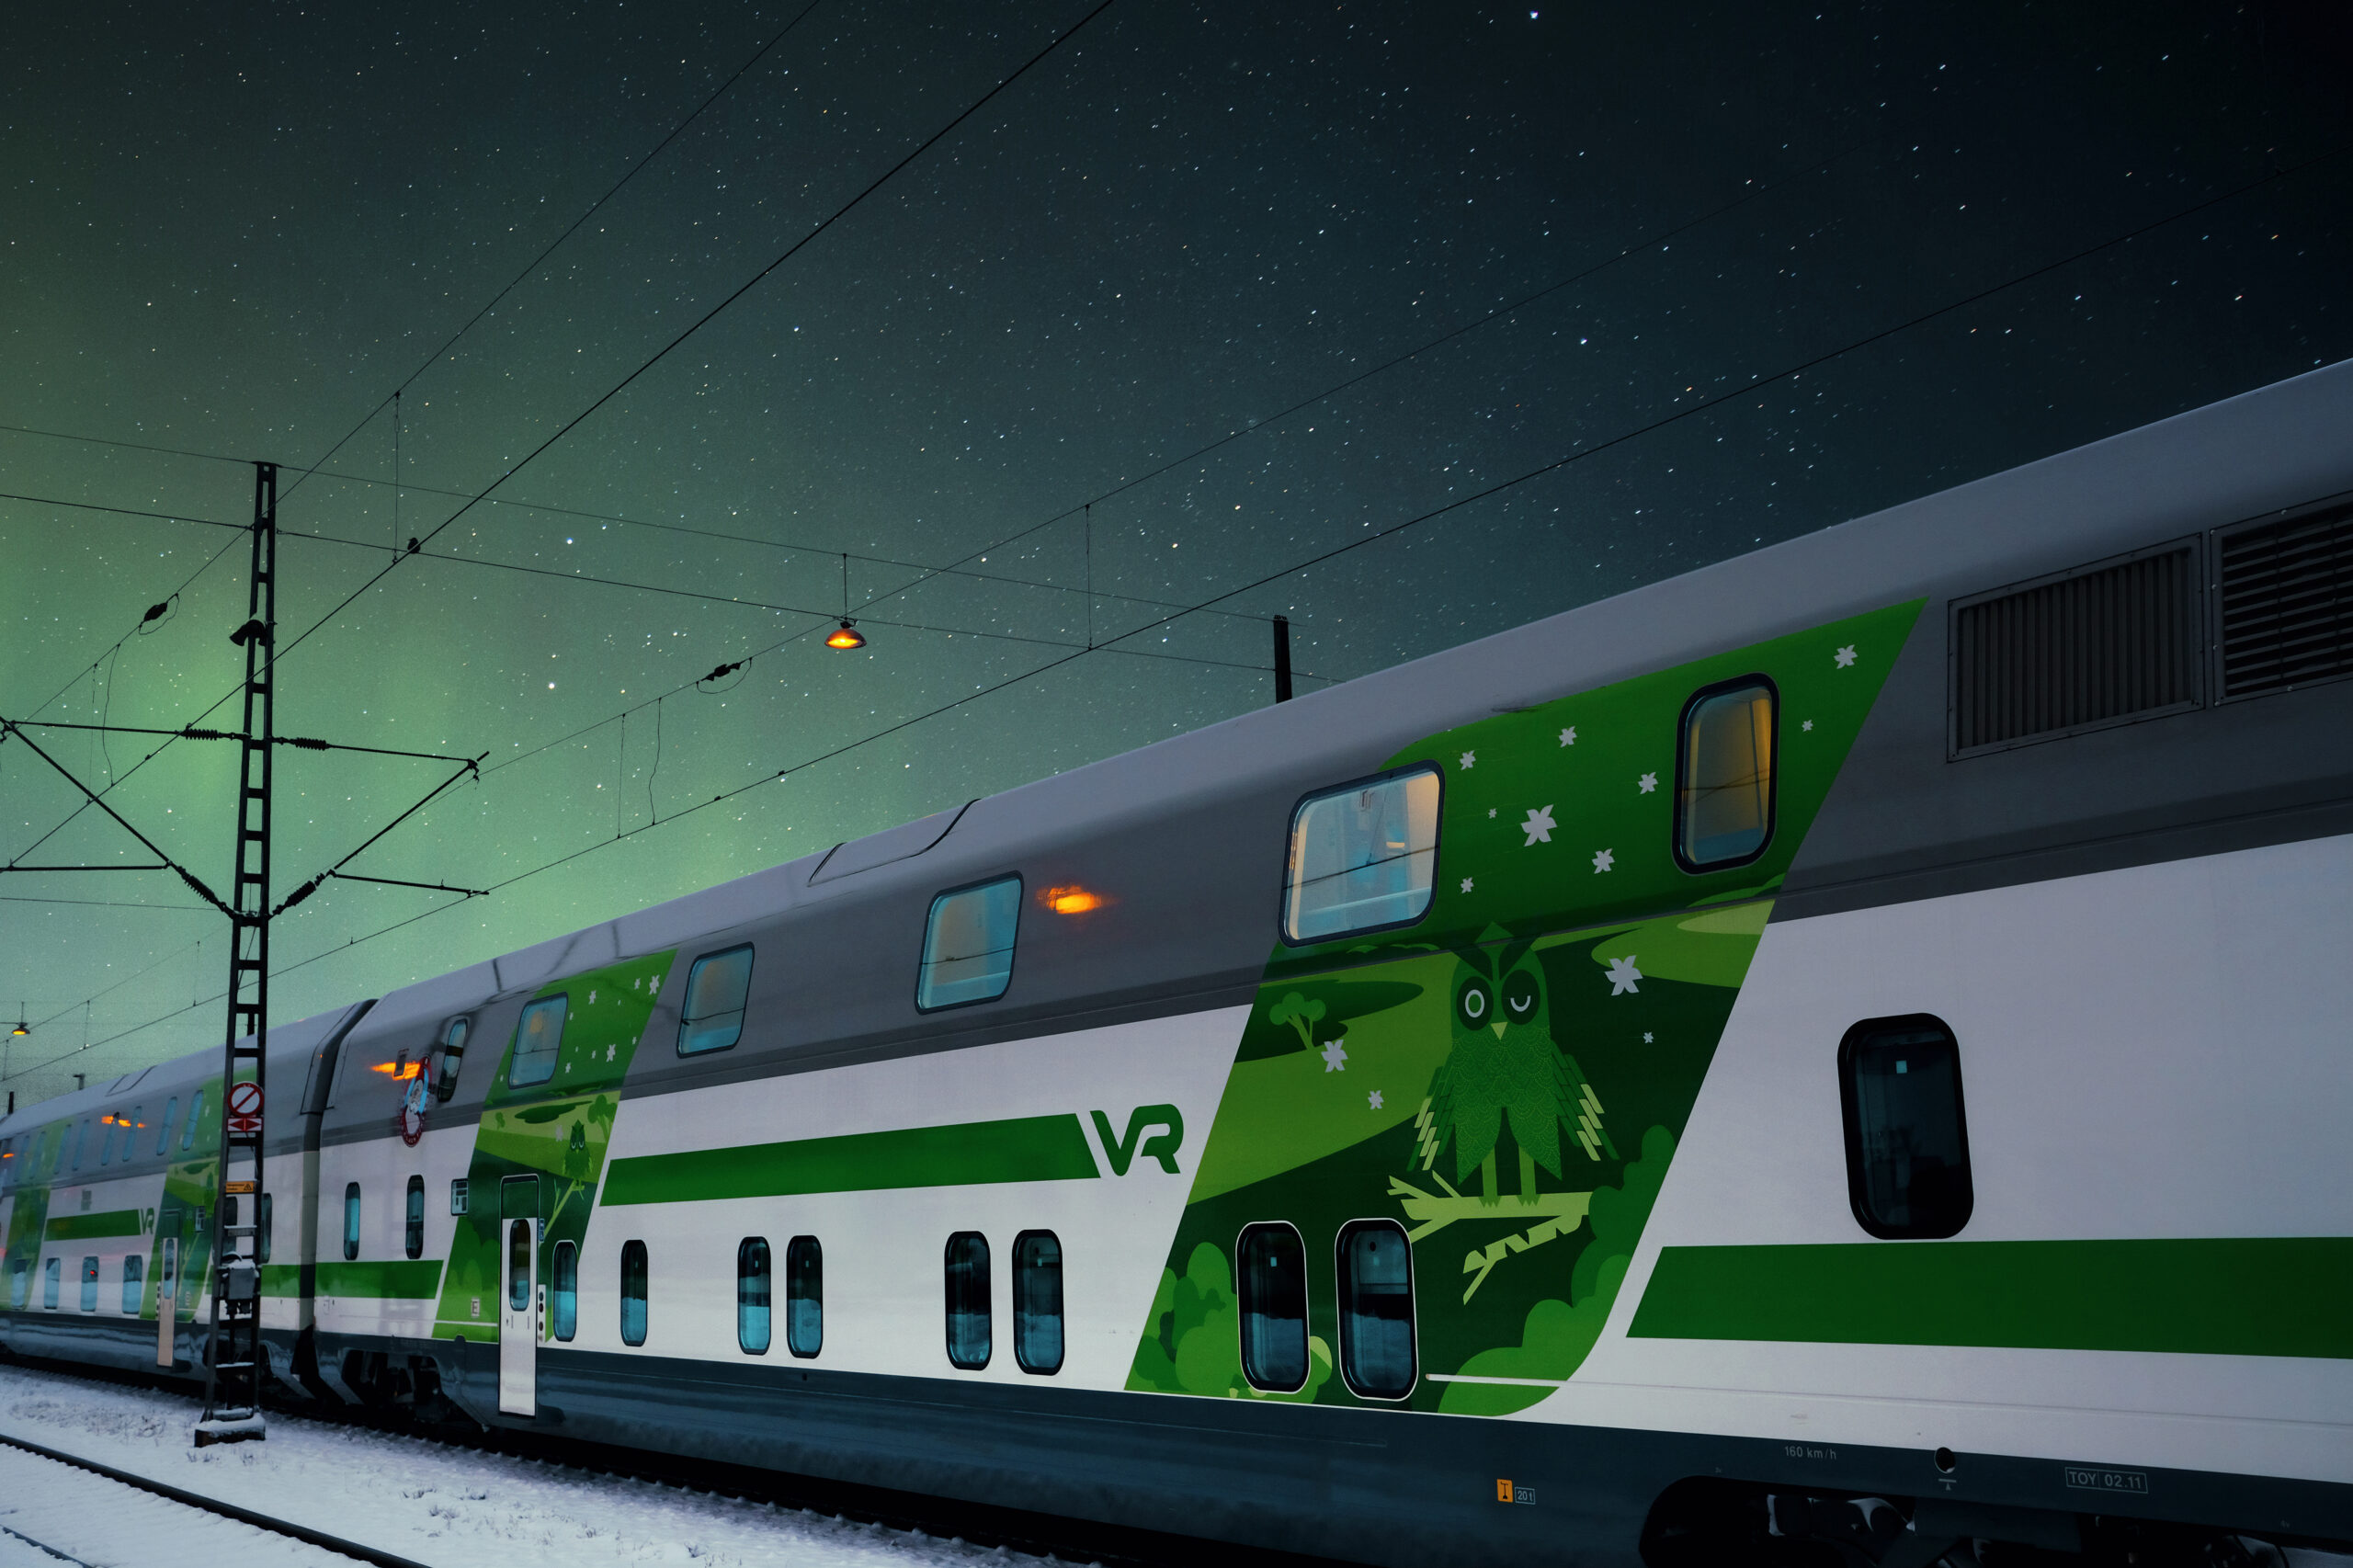 Visualisation of a VR Group overnight train in Finland